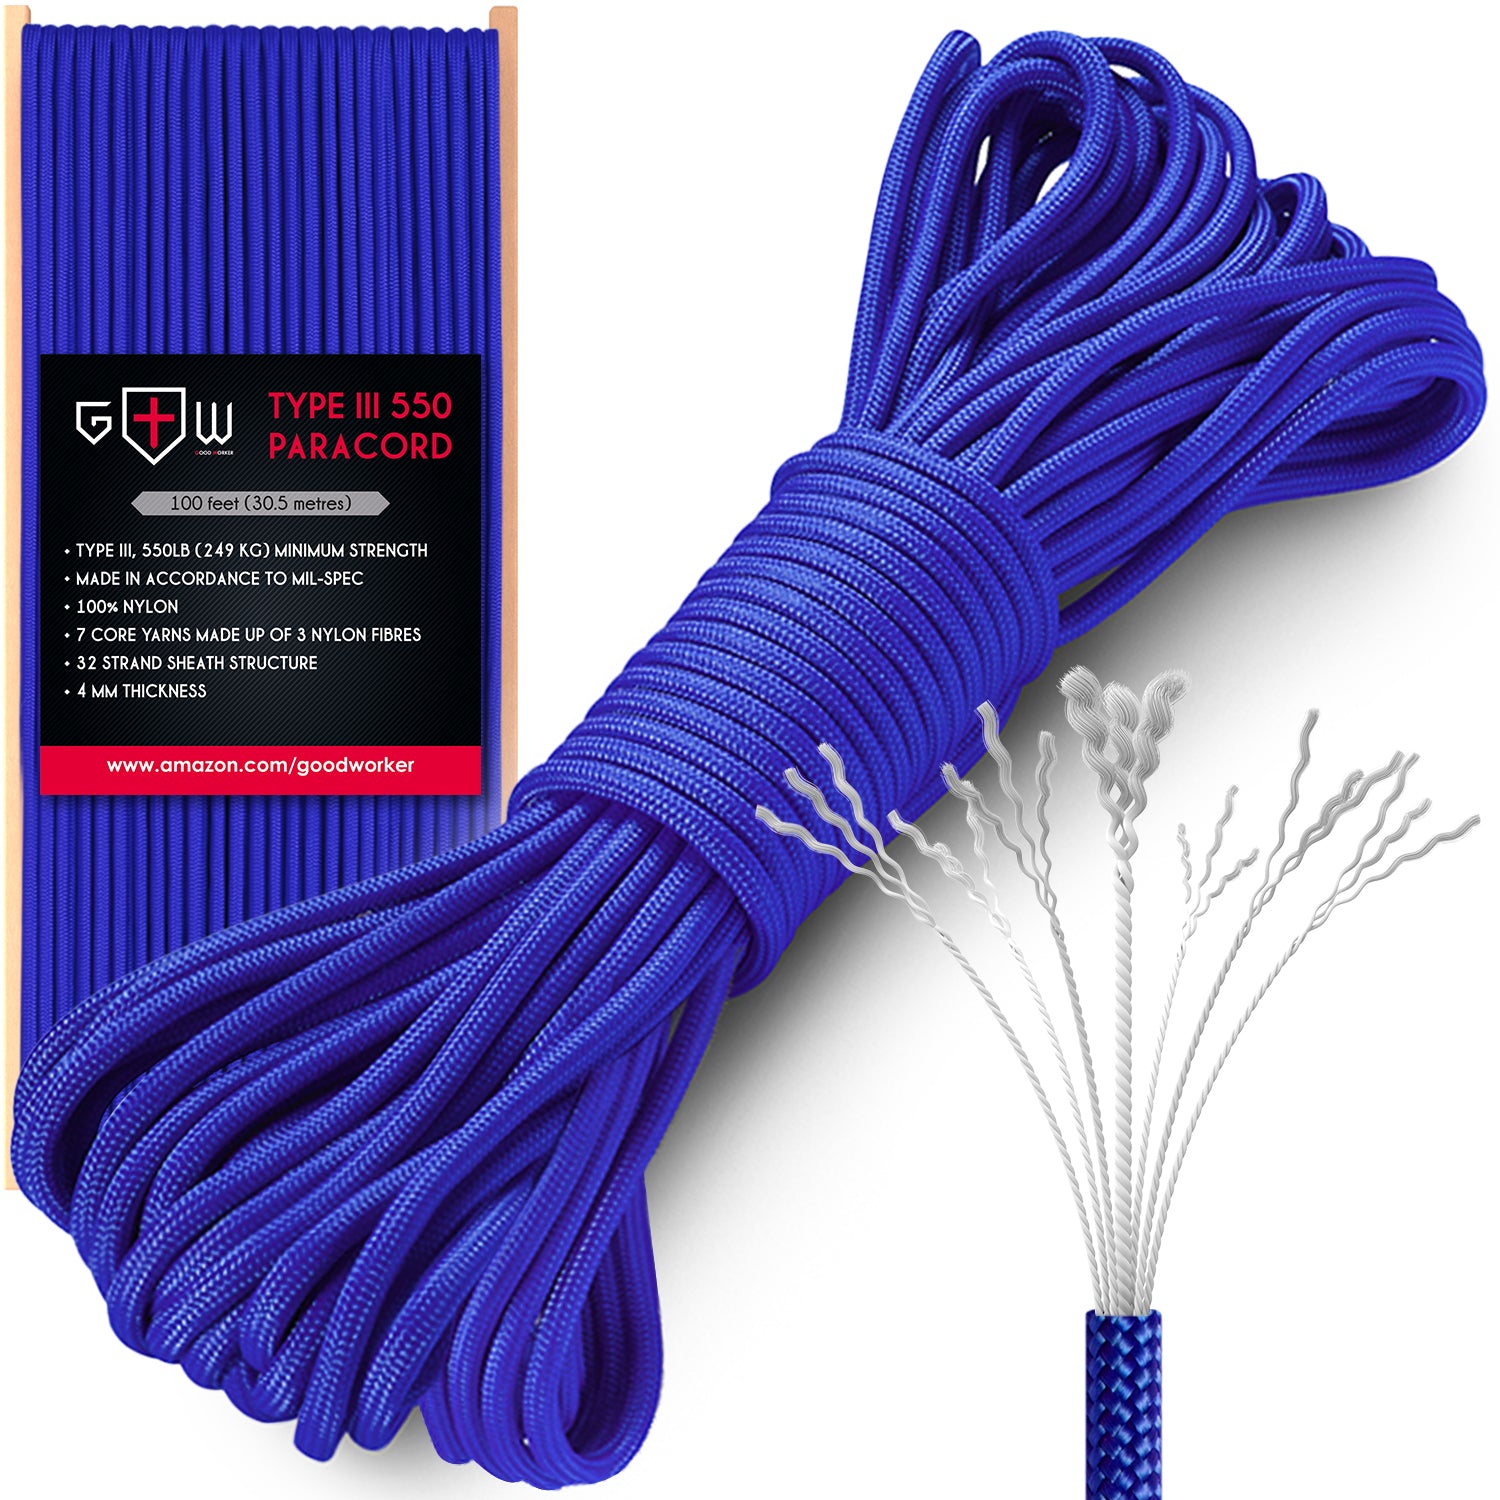 Grand Way 550 Mil-Spec Paracord Type III (100ft; Navy Blue)